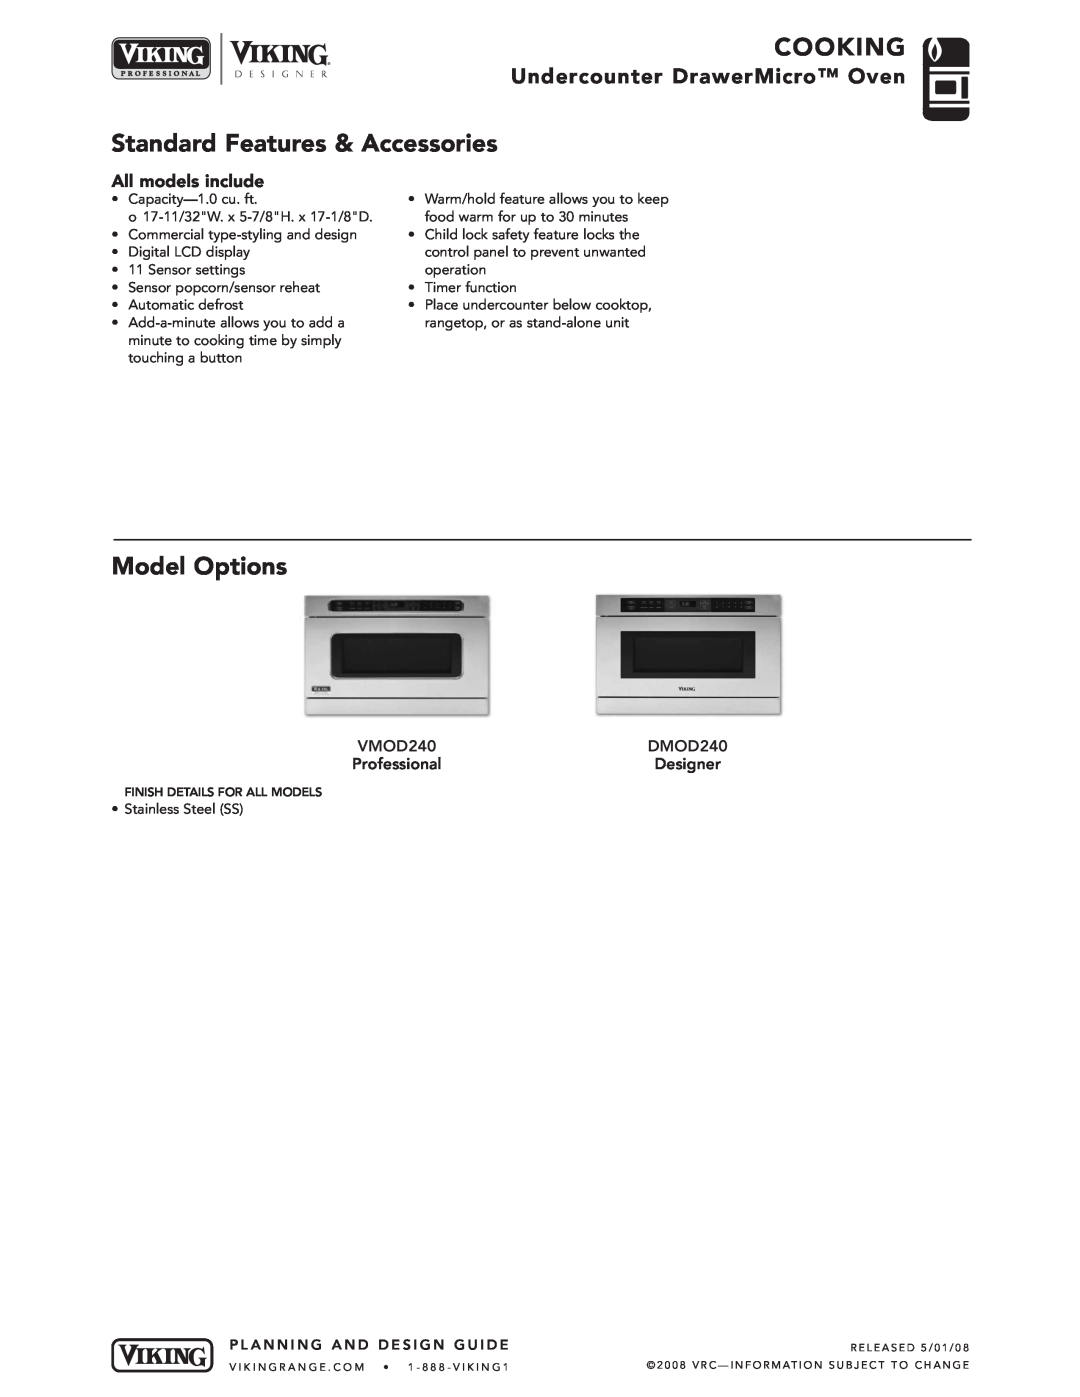 Viking DMOD240 manual Cooking, Standard Features & Accessories, Model Options, Undercounter DrawerMicro Oven, VMOD240 